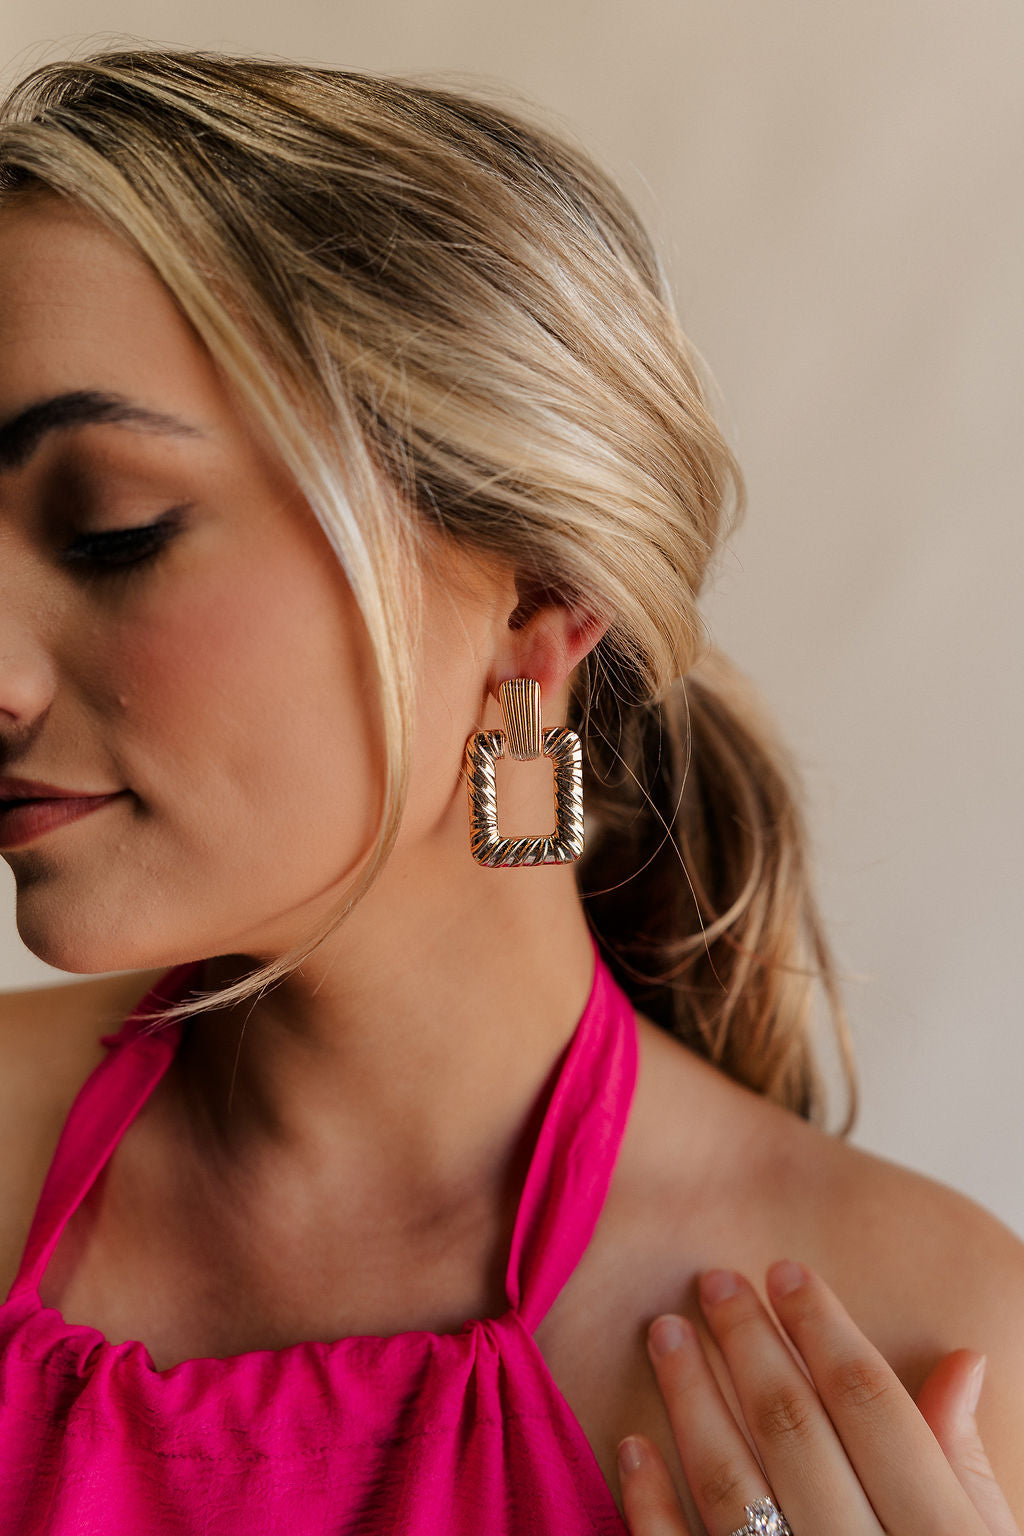 Side view of female model wearing the Ara Gold Square Dangle Earring which features gold roped details and open square shaped dangle earring